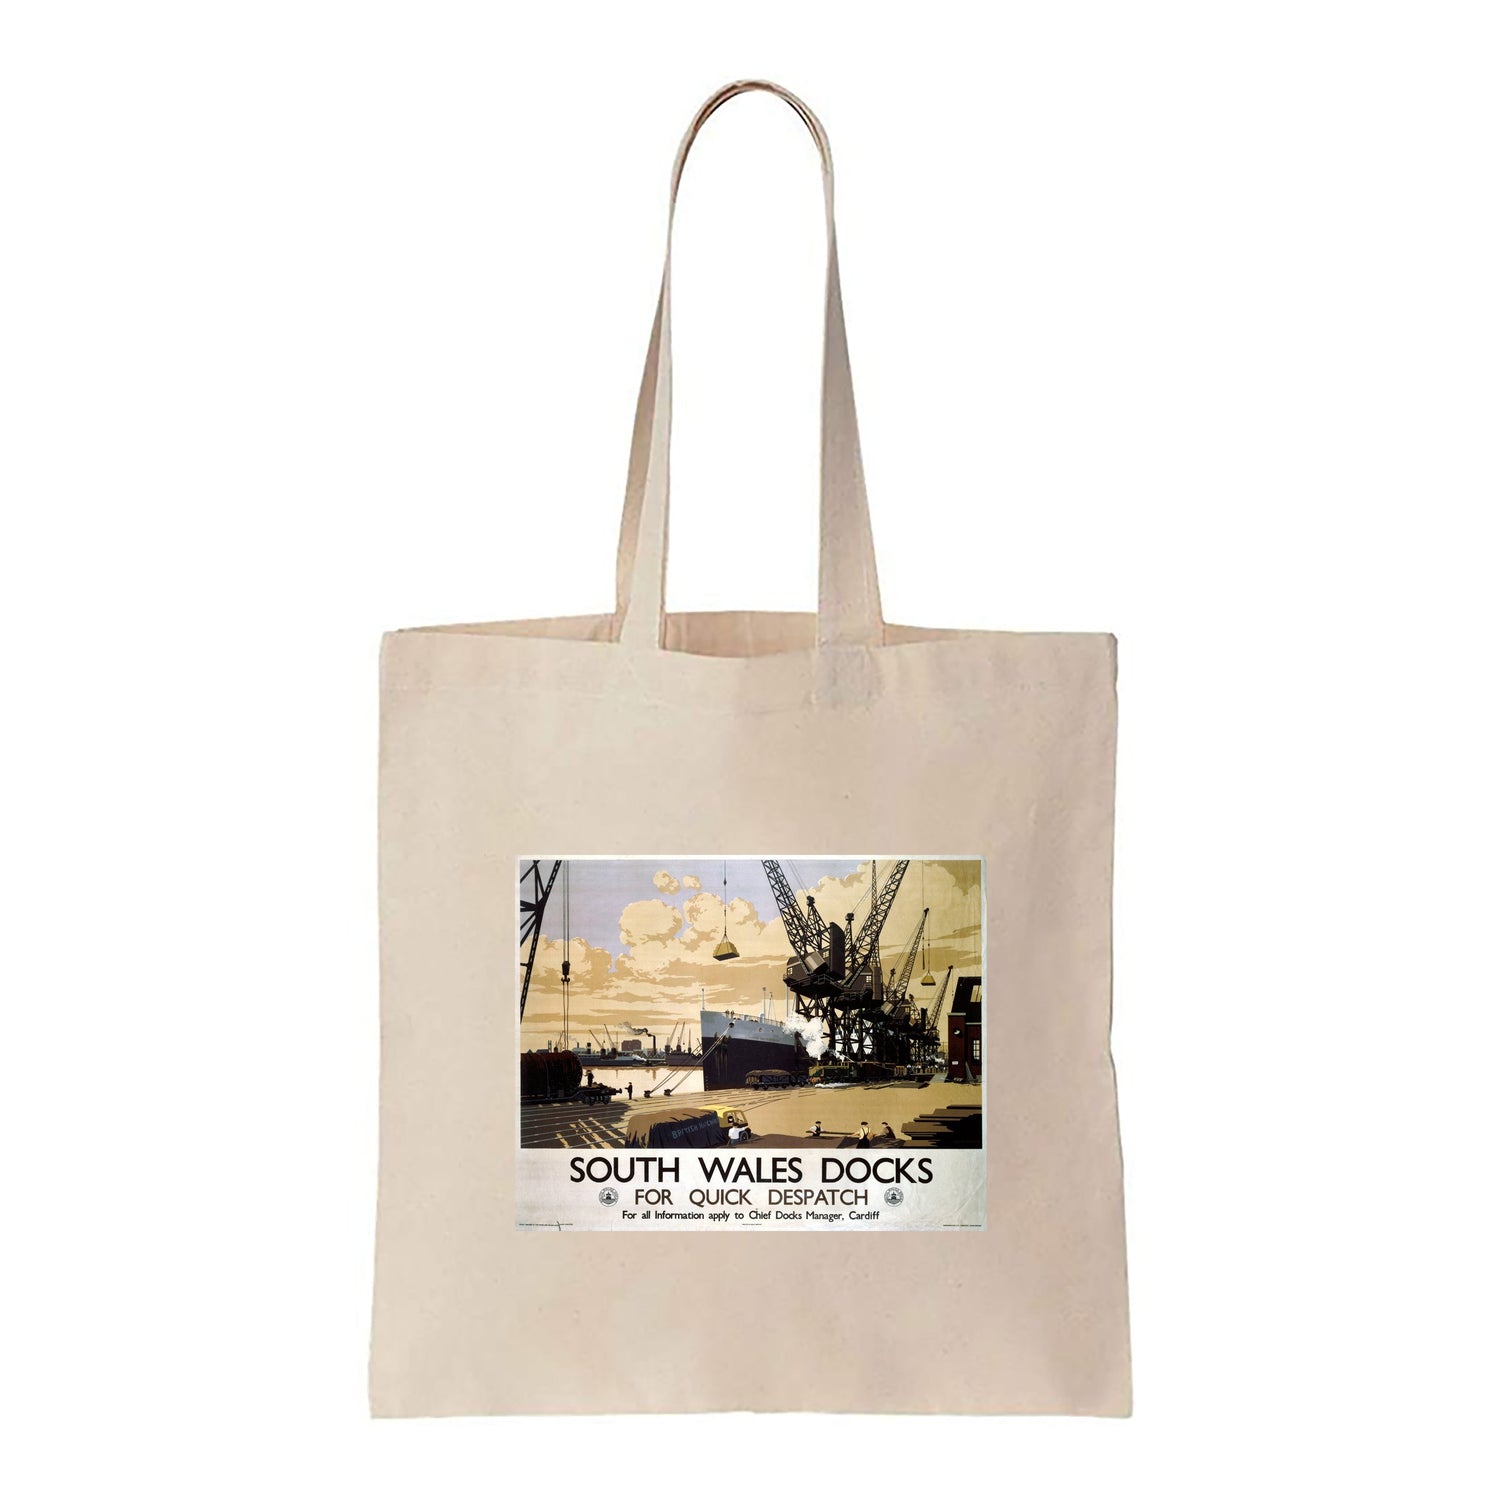 South Wales Docks for Quick Despatch - Canvas Tote Bag